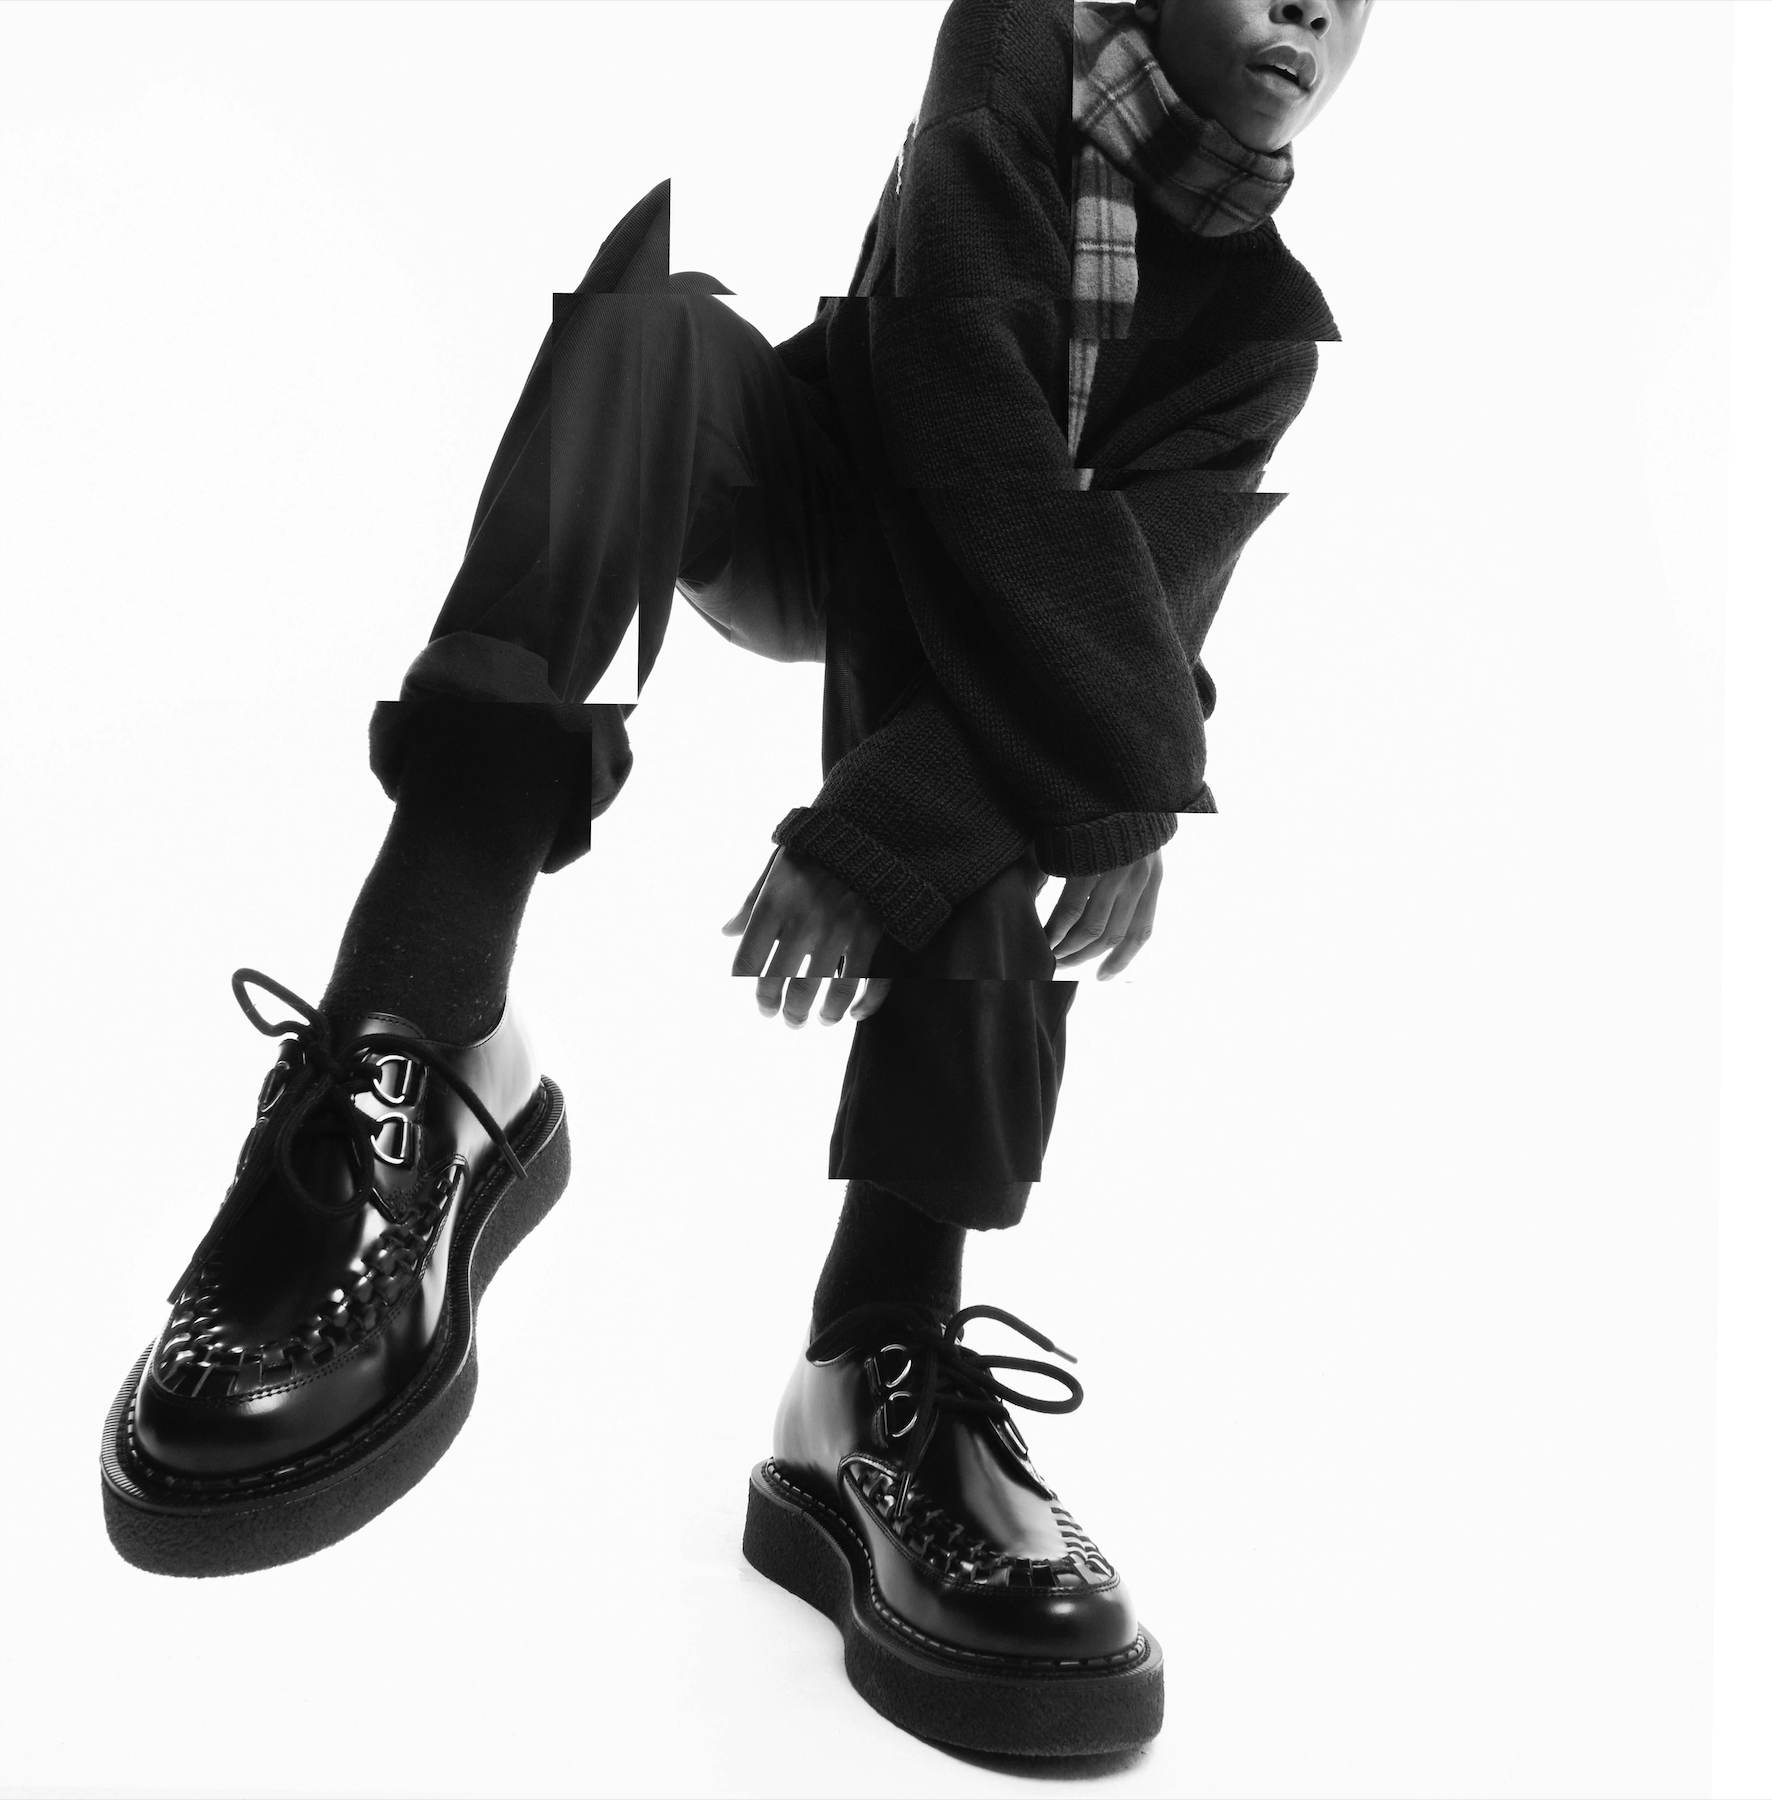 Model leaning over wearing black Hatton Creepers